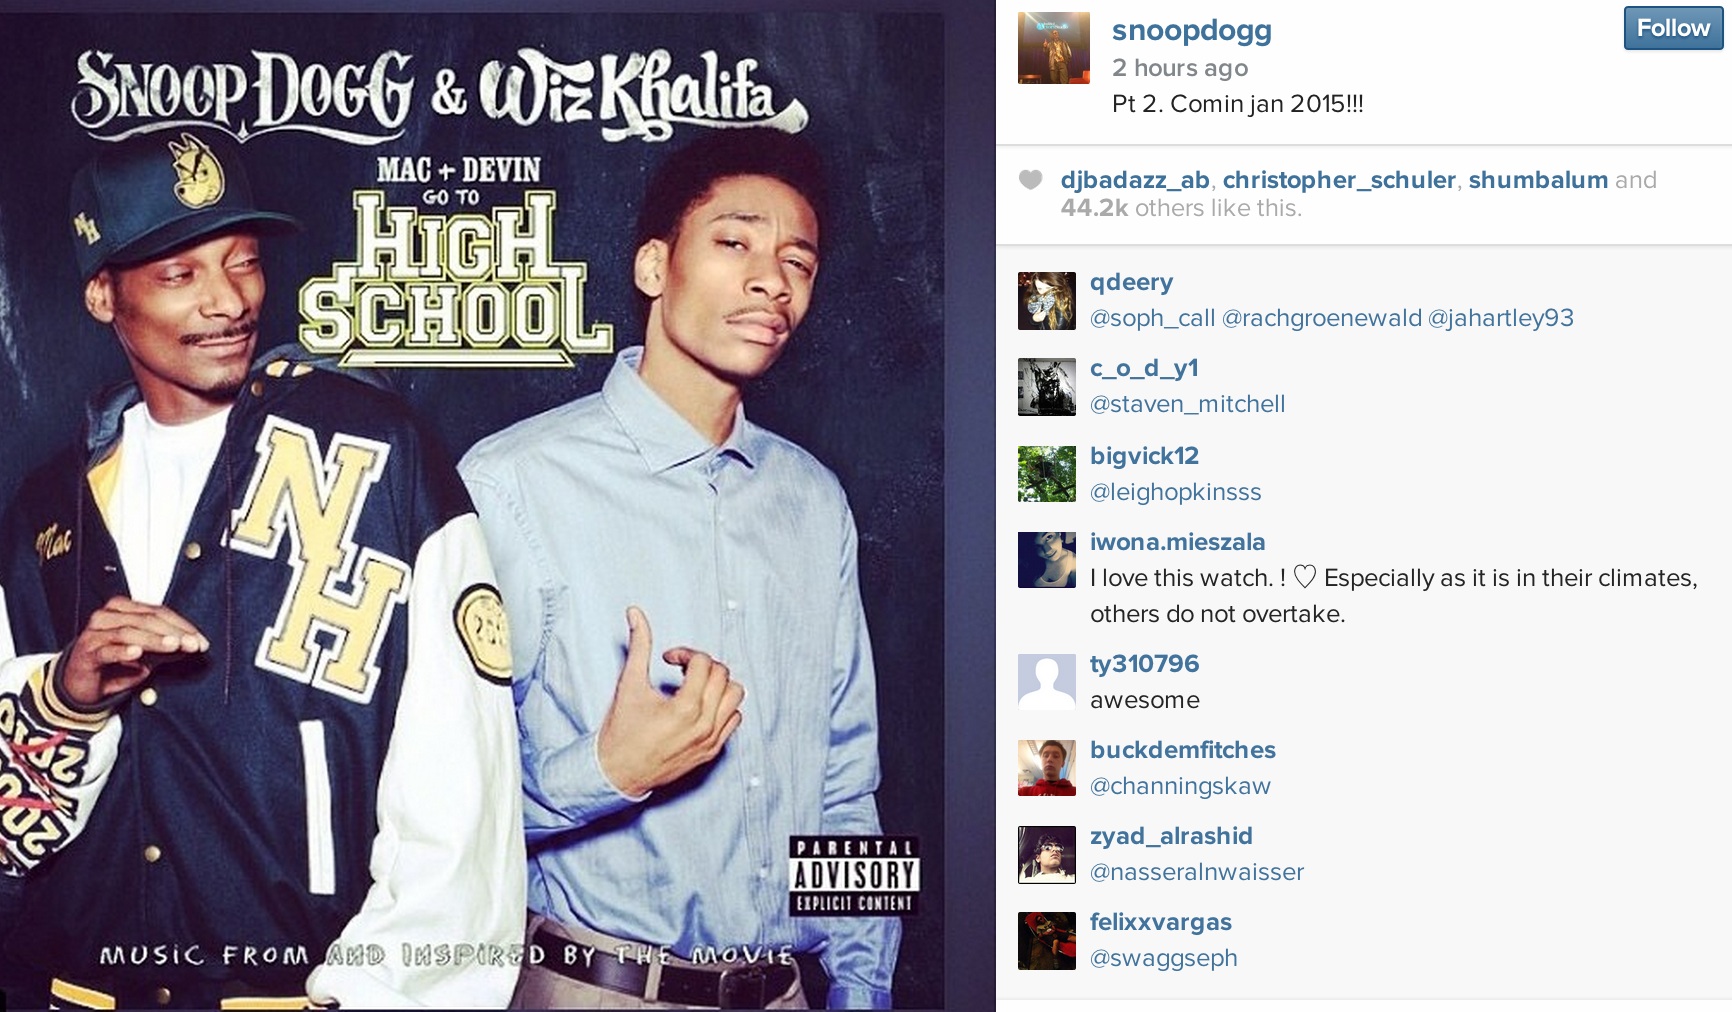 mack and devin go to high school soundtrack